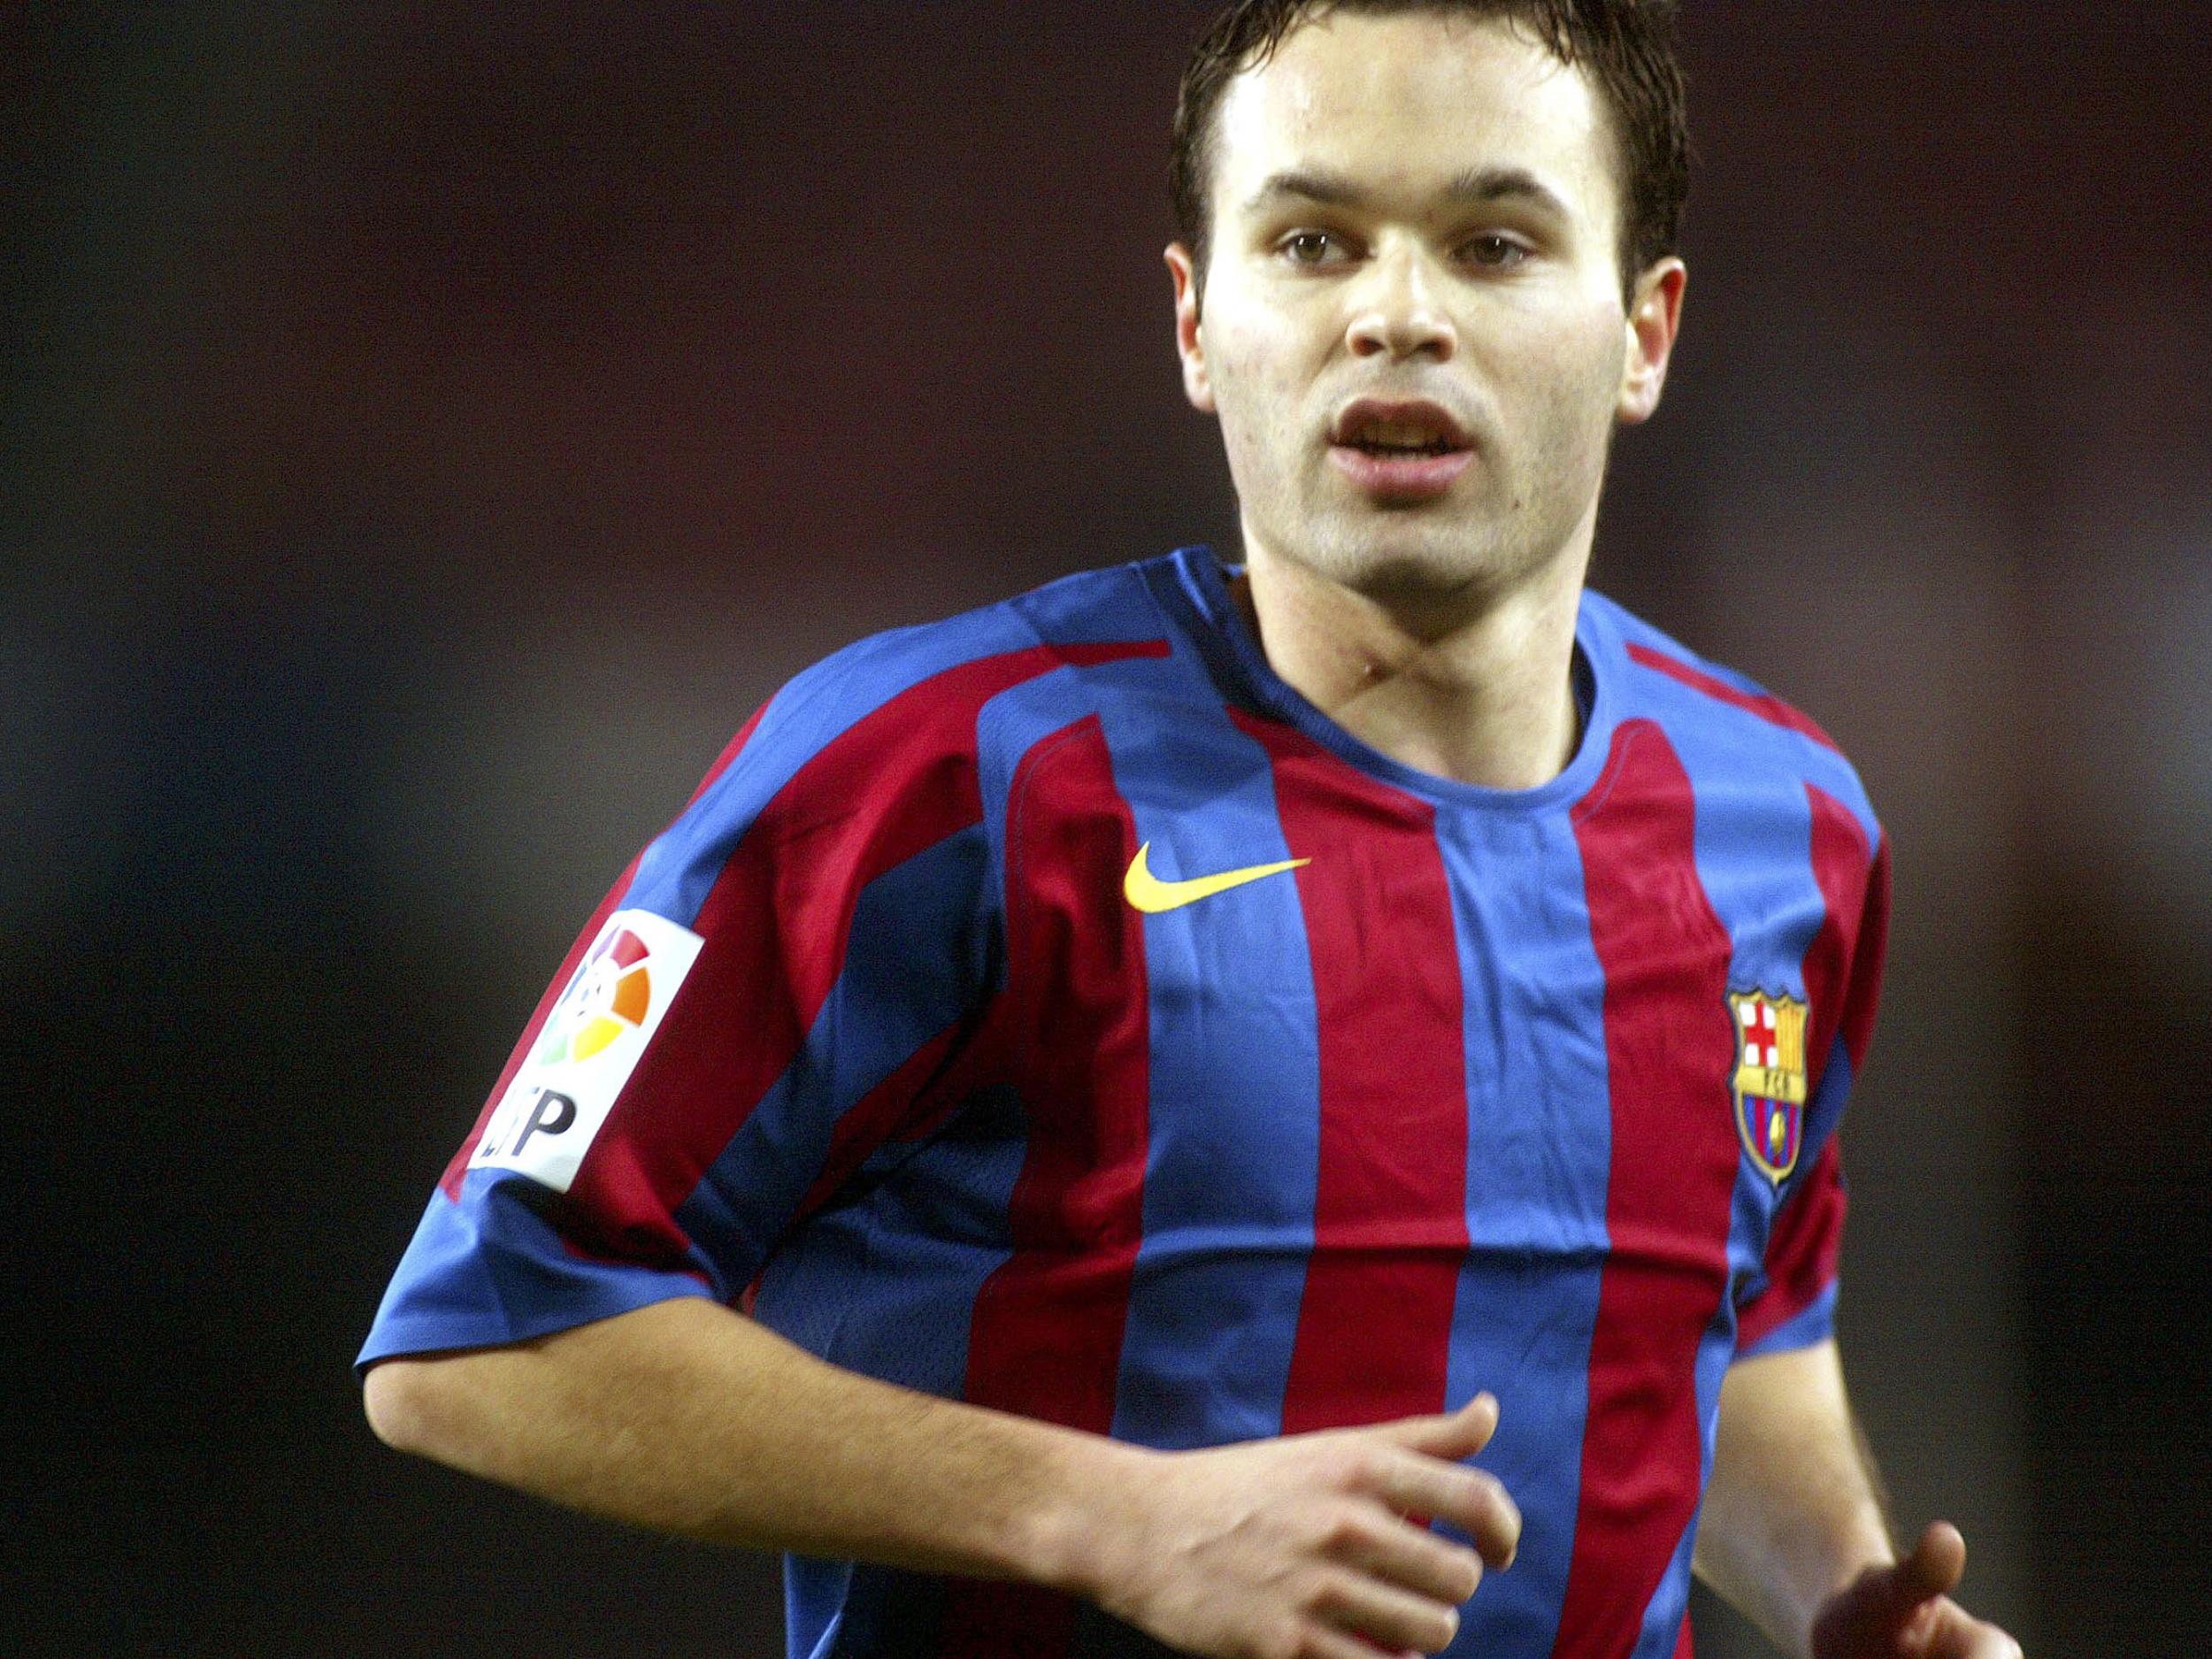 Andres Iniesta broke into the Barcelona first team in 2004